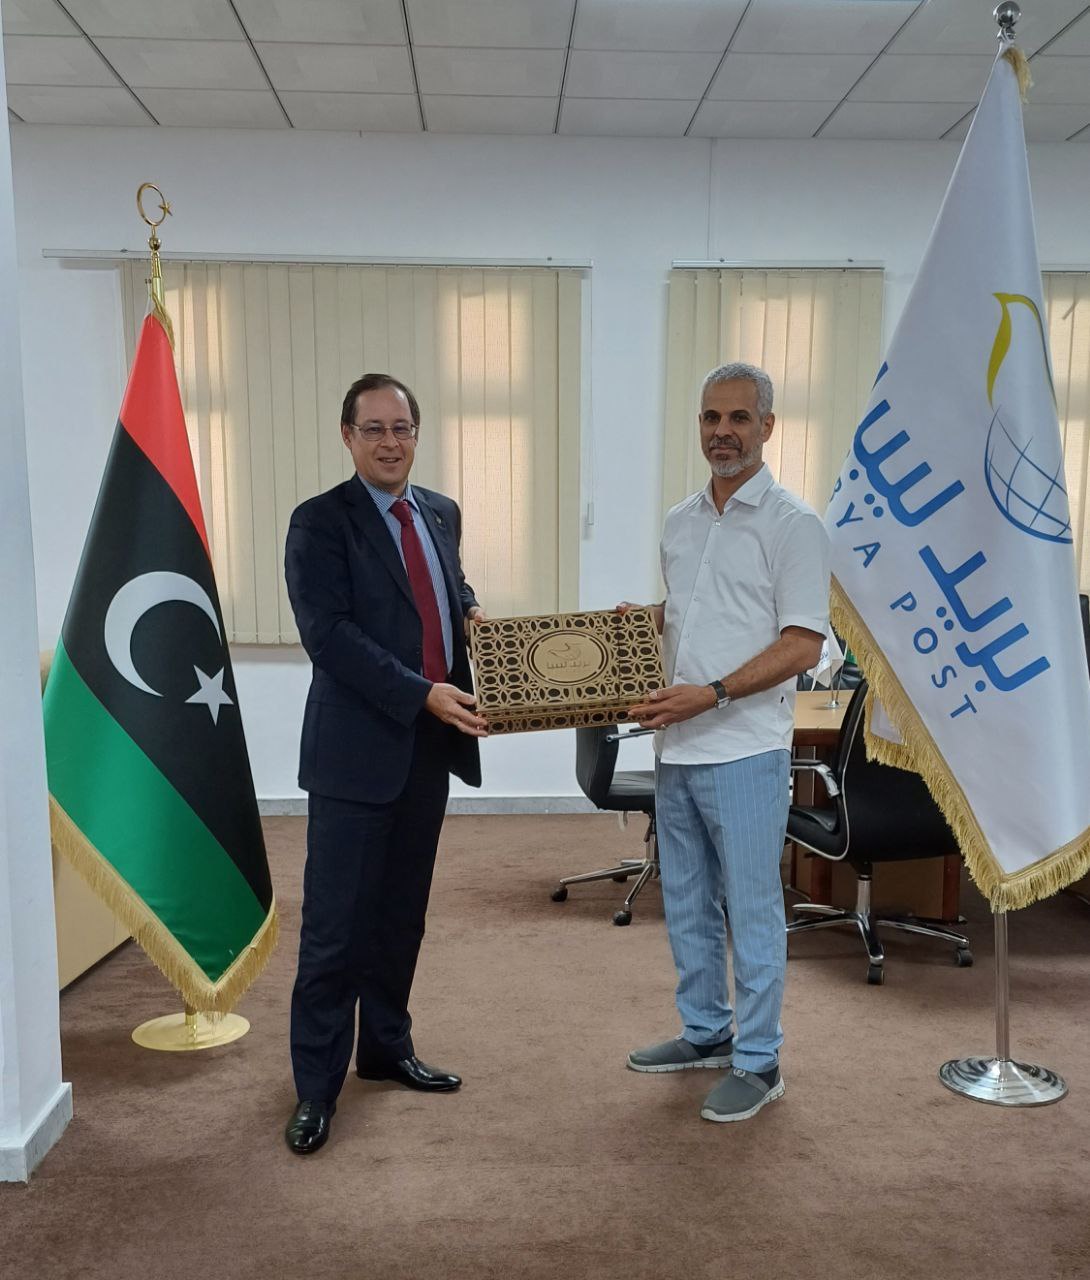 Russian Ambassador to Libya meets with the Chairman of the Board of Directors of Libya Post.